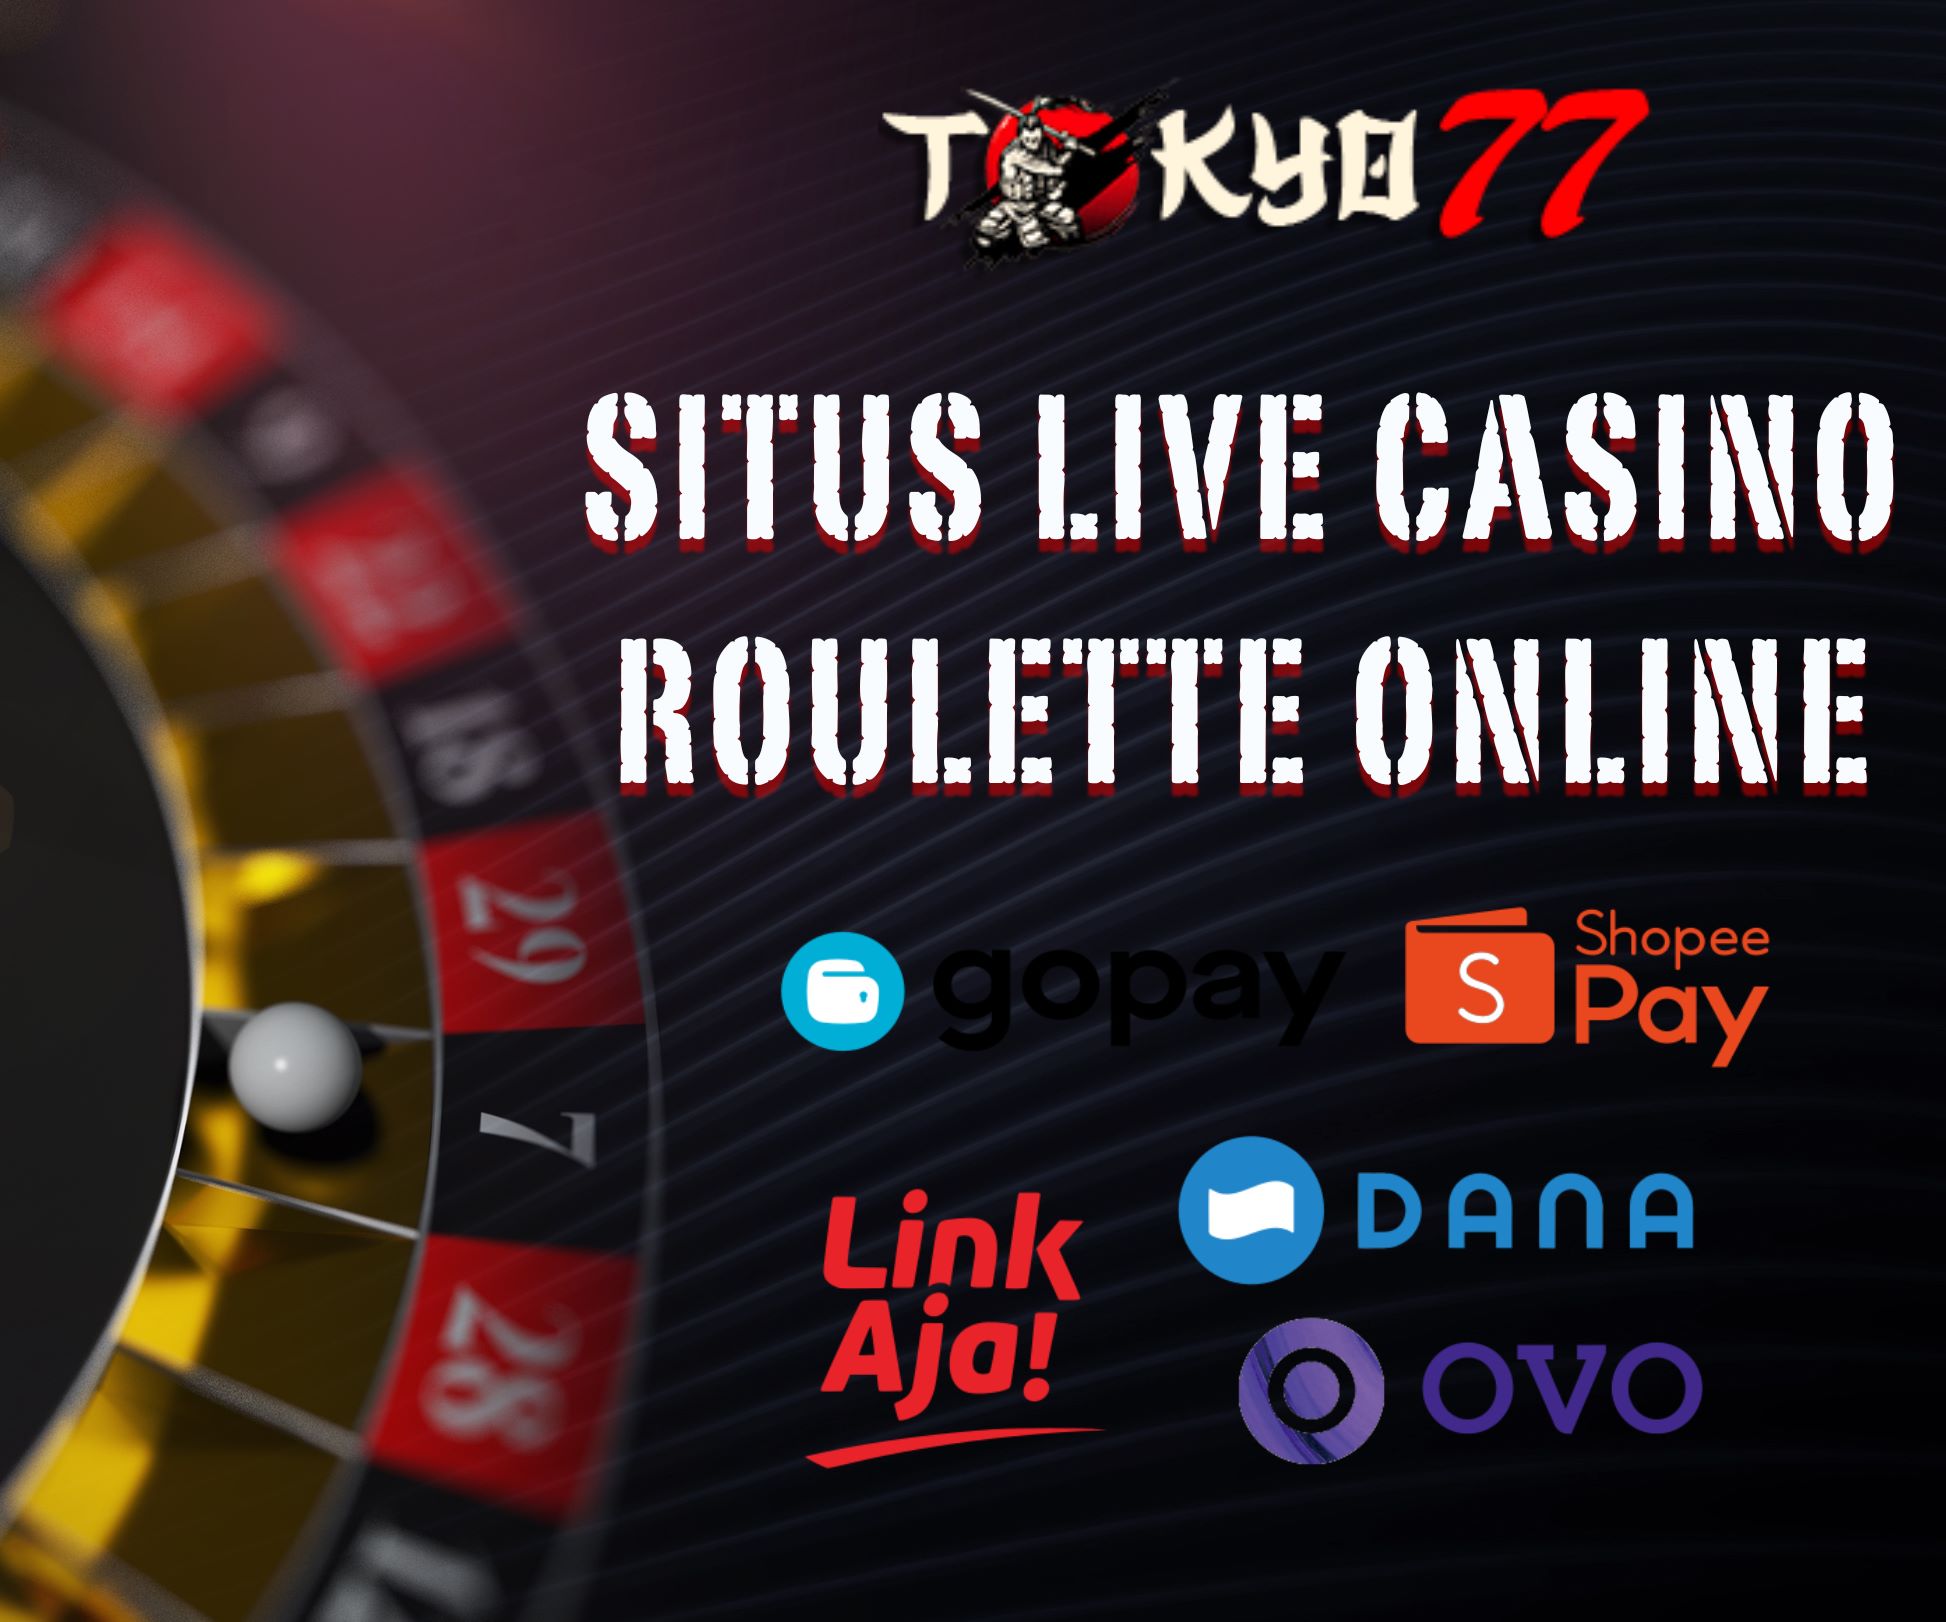 Tips on How to Safely Play Online Roulette by Tokyo77